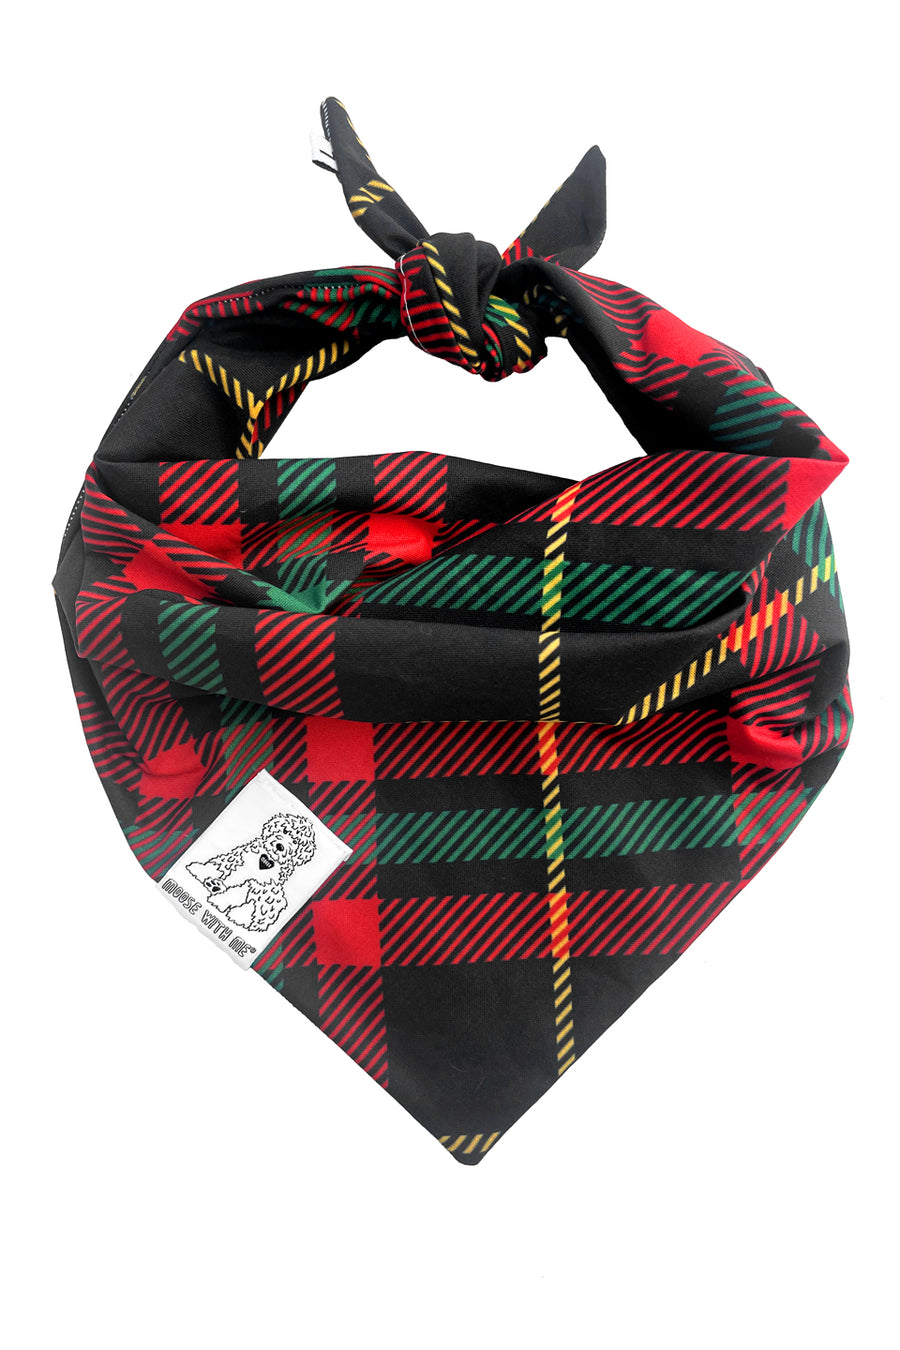 Dog Bandana Red Plaid - Customize with Interchangeable Velcro Patches